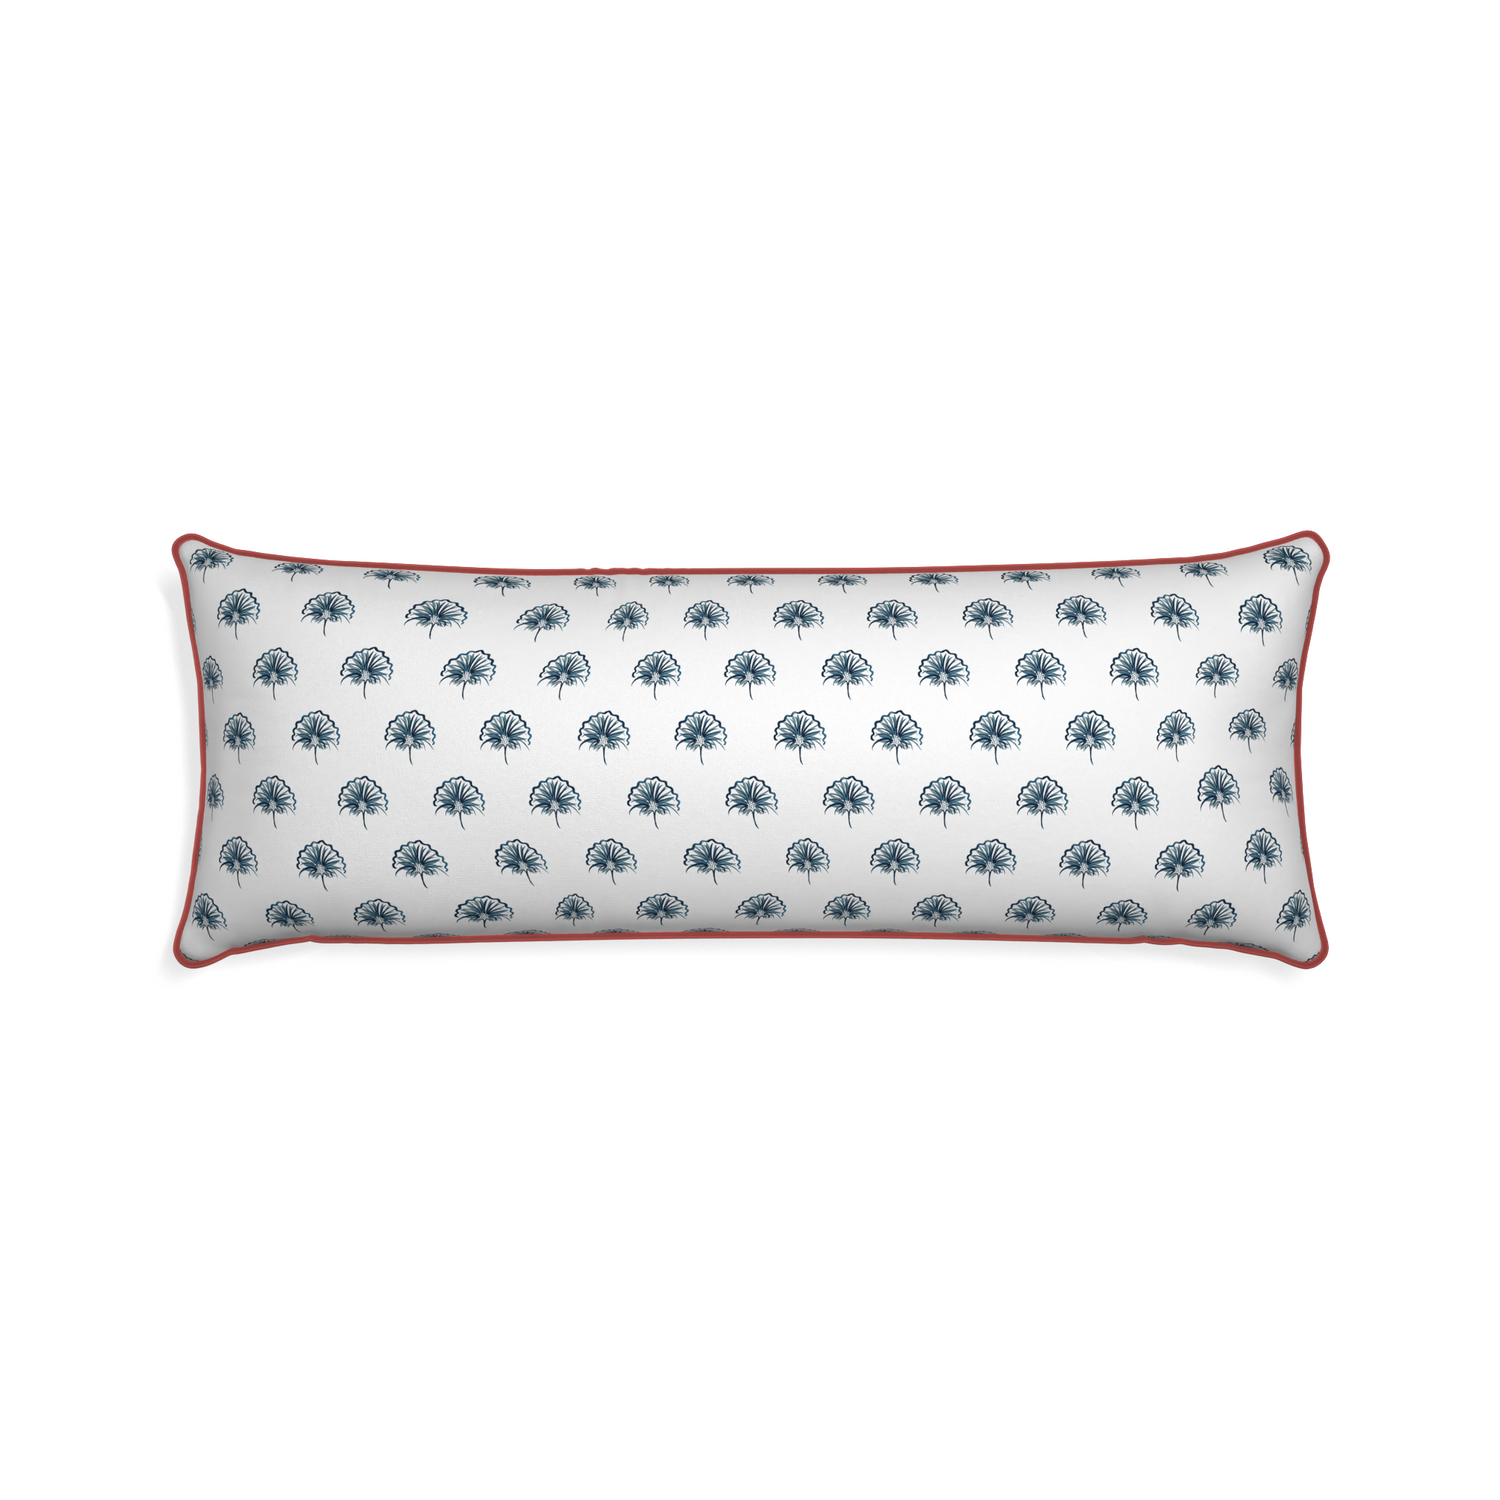 Xl-lumbar penelope midnight custom pillow with c piping on white background